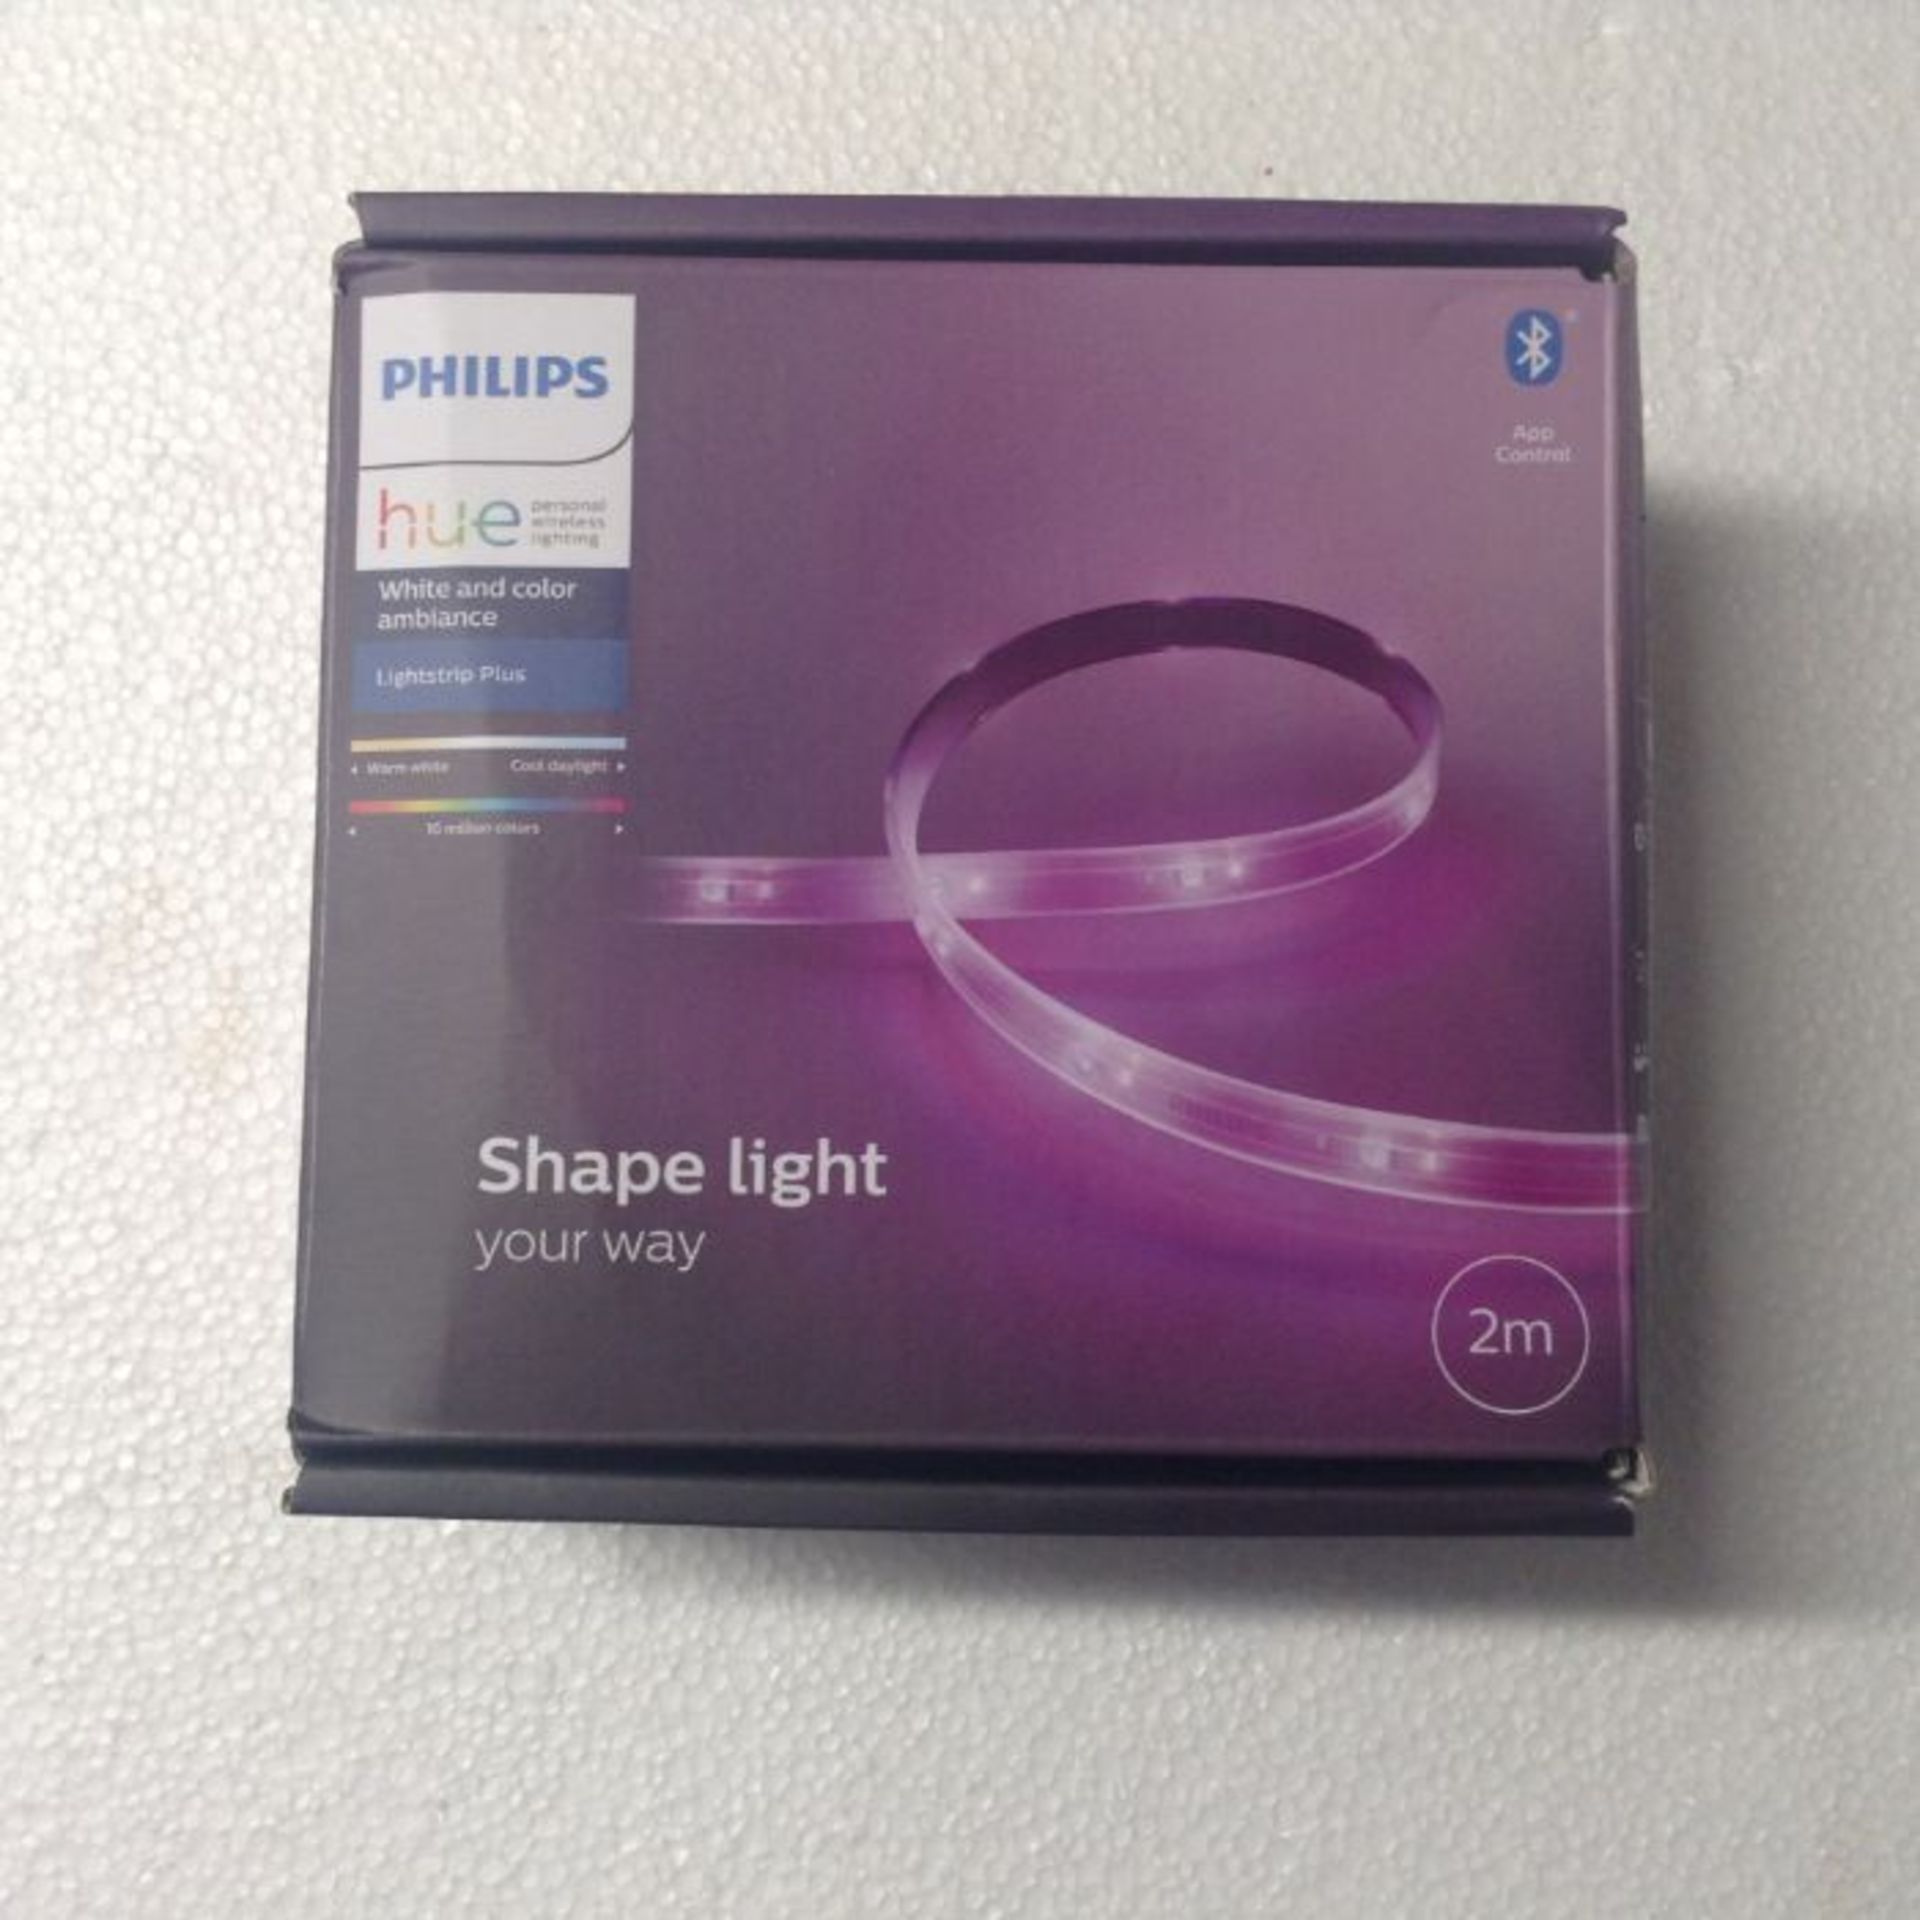 Philips Hue Lightstrip Plus v4 [2 m] White & Colour Ambiance Smart LED Kit with Bluetooth, Works